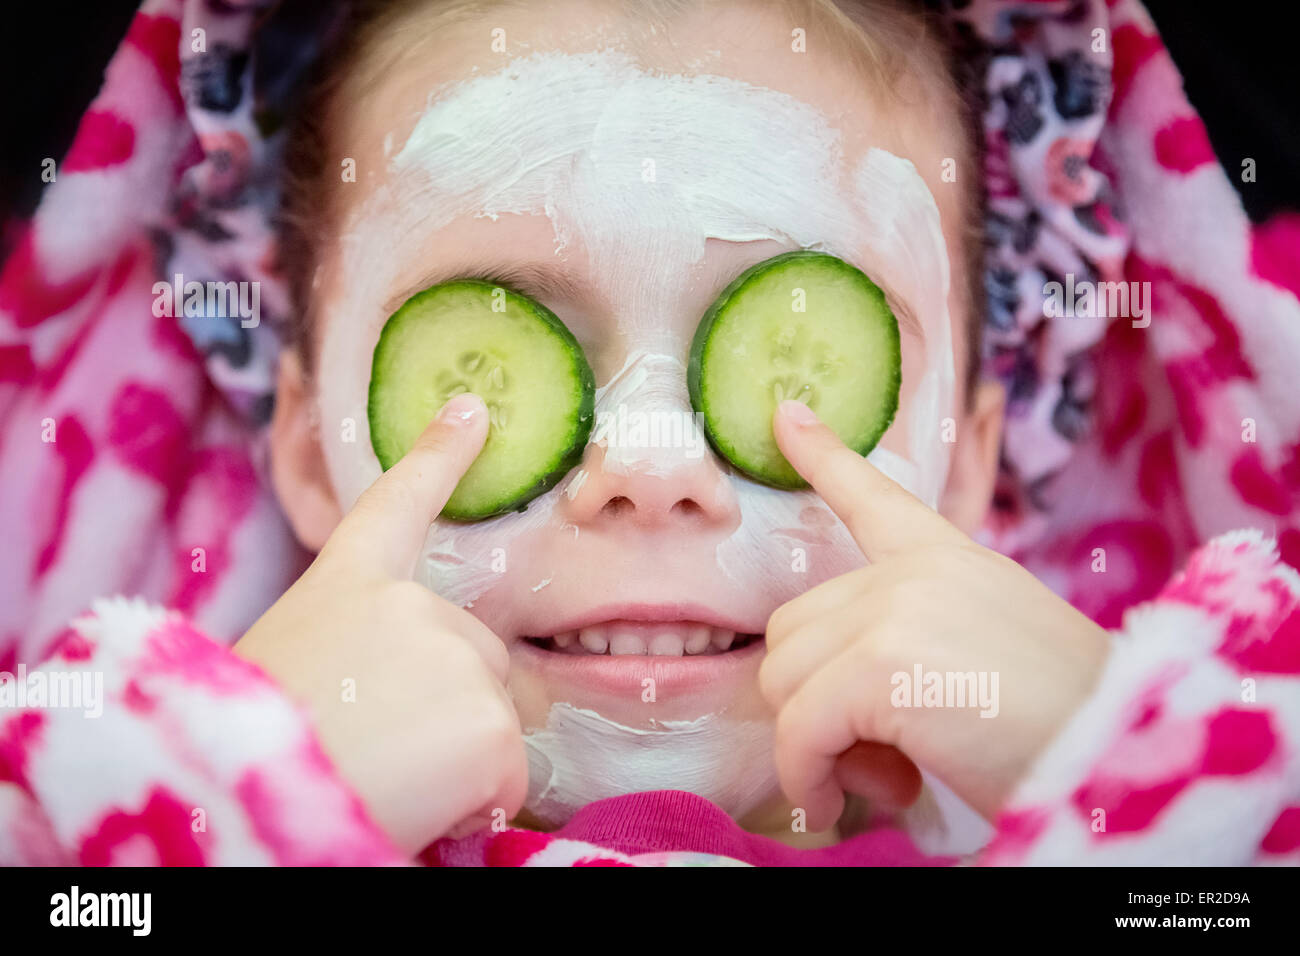 Young child relaxing with cucumber slices over eyes during a spa facial beauty treatment session Stock Photo